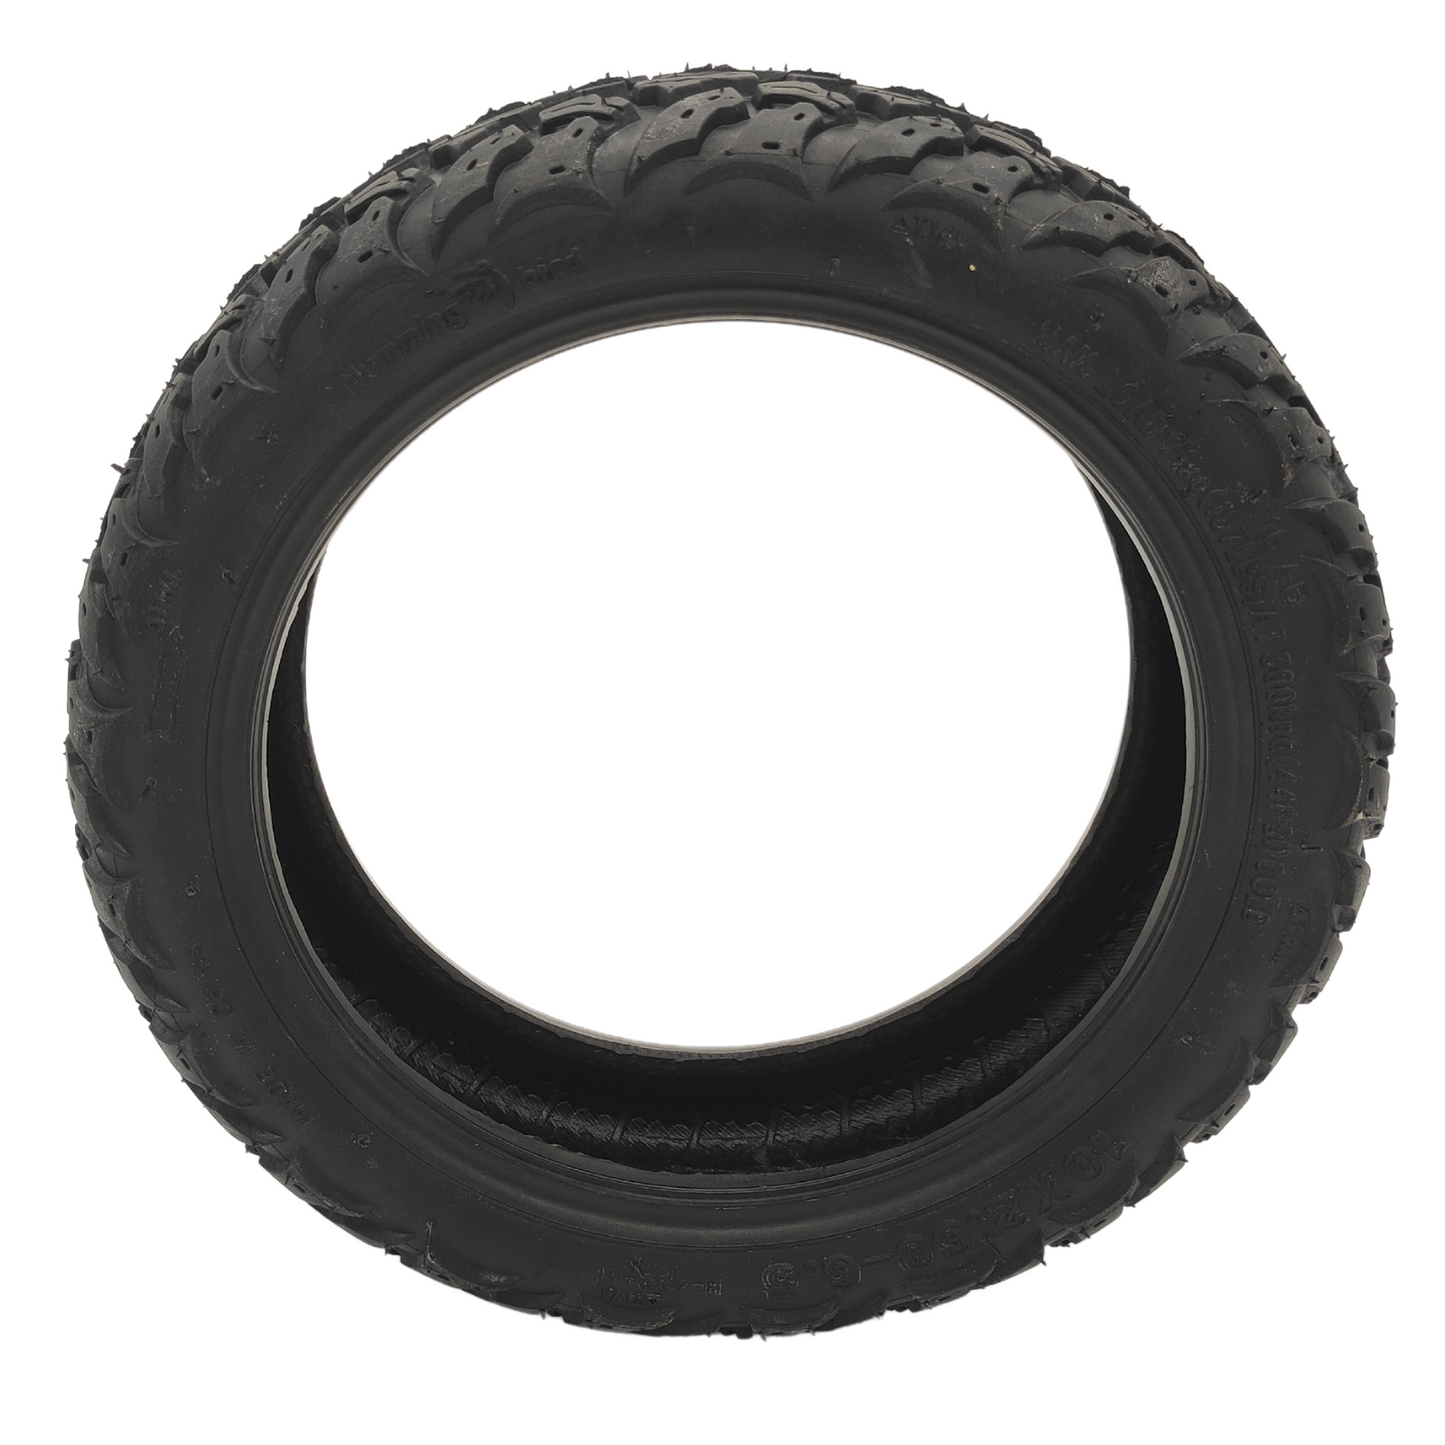 Odys Alpha X3 Pro off-road band tubeless 10x2,5-6,5 inch met ventiel aftermarket